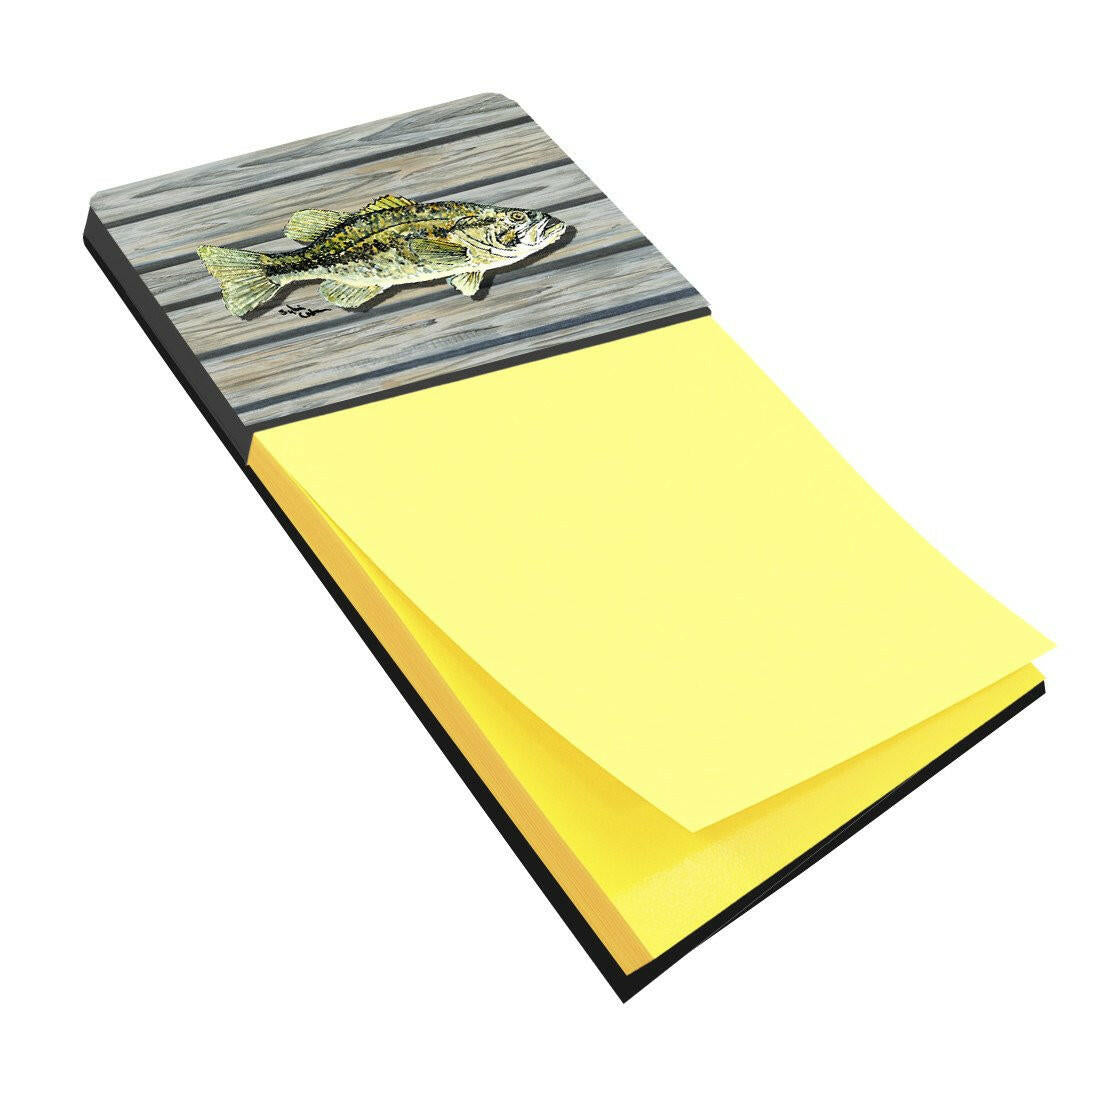 Fish Bass Small Mouth Refiillable Sticky Note Holder or Postit Note Dispenser 8493SN by Caroline's Treasures